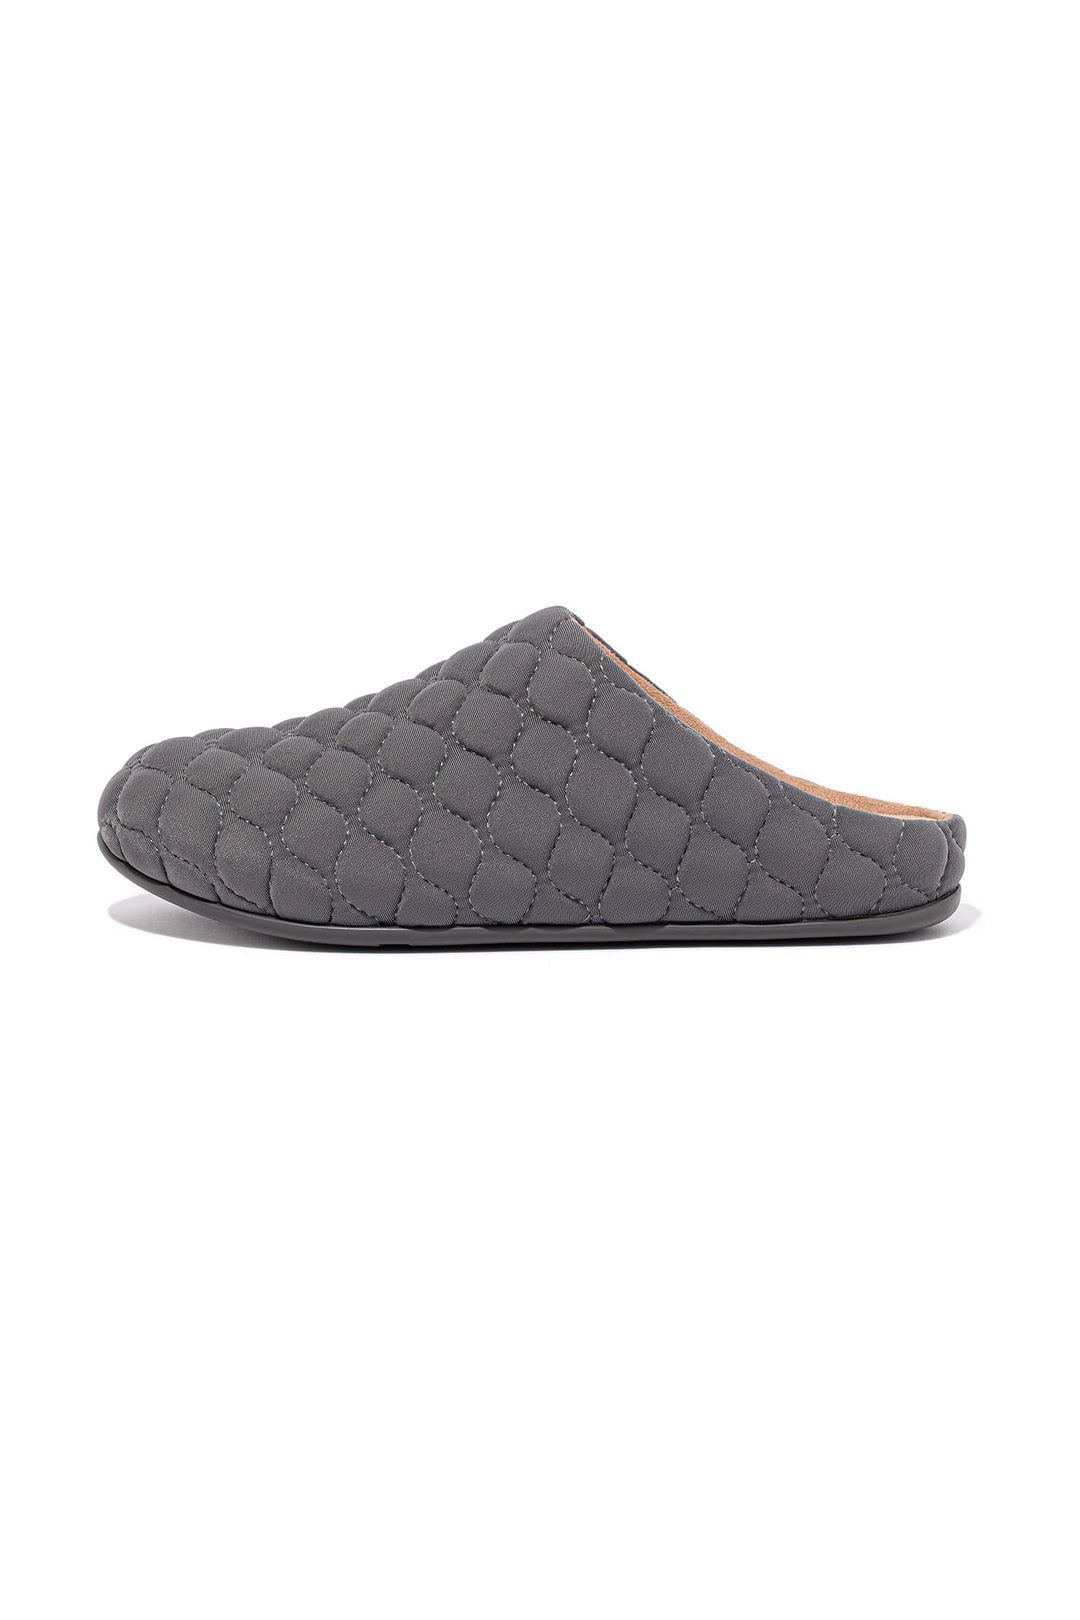 Fitflop Chrissie DY8-861 Pewter Grey Padded Slipper - Shirey Allum Boutique